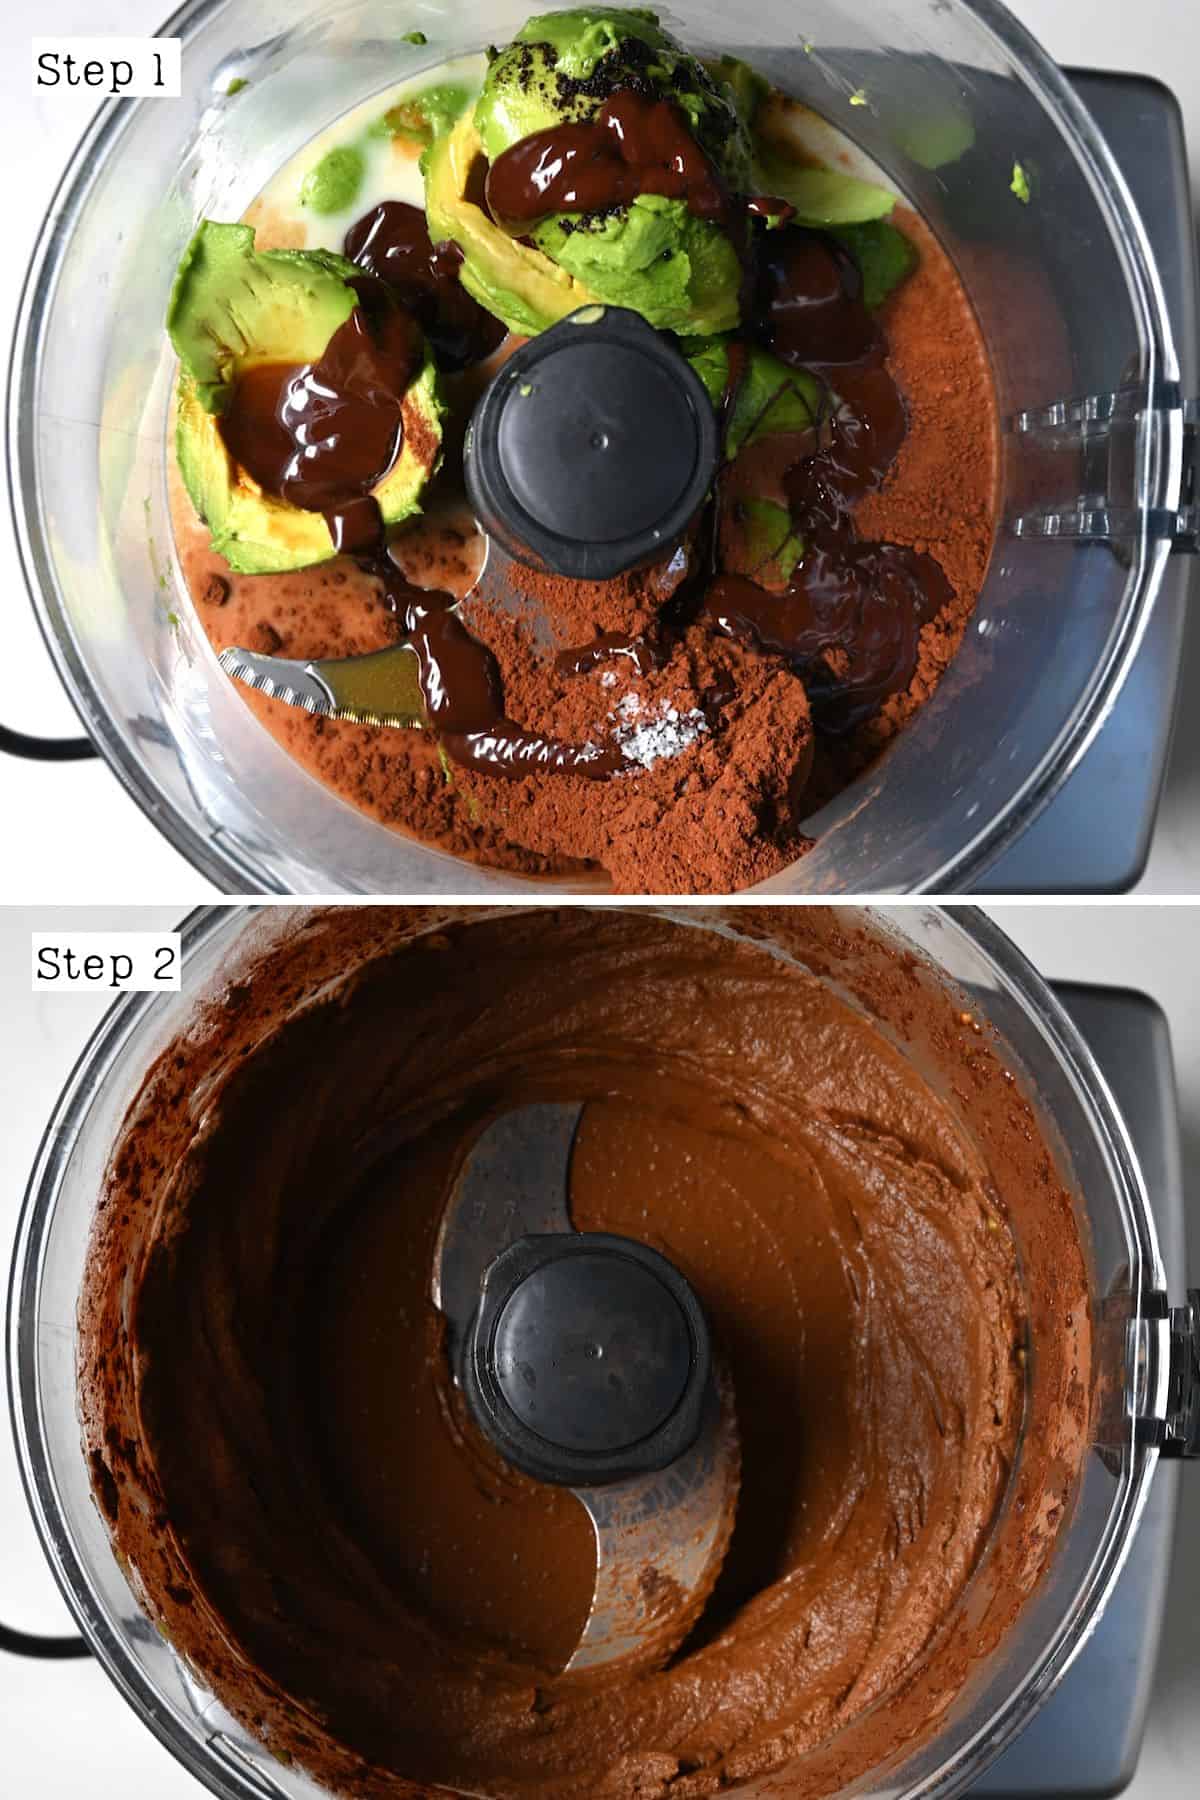 Steps for making avocado chocolate mousse